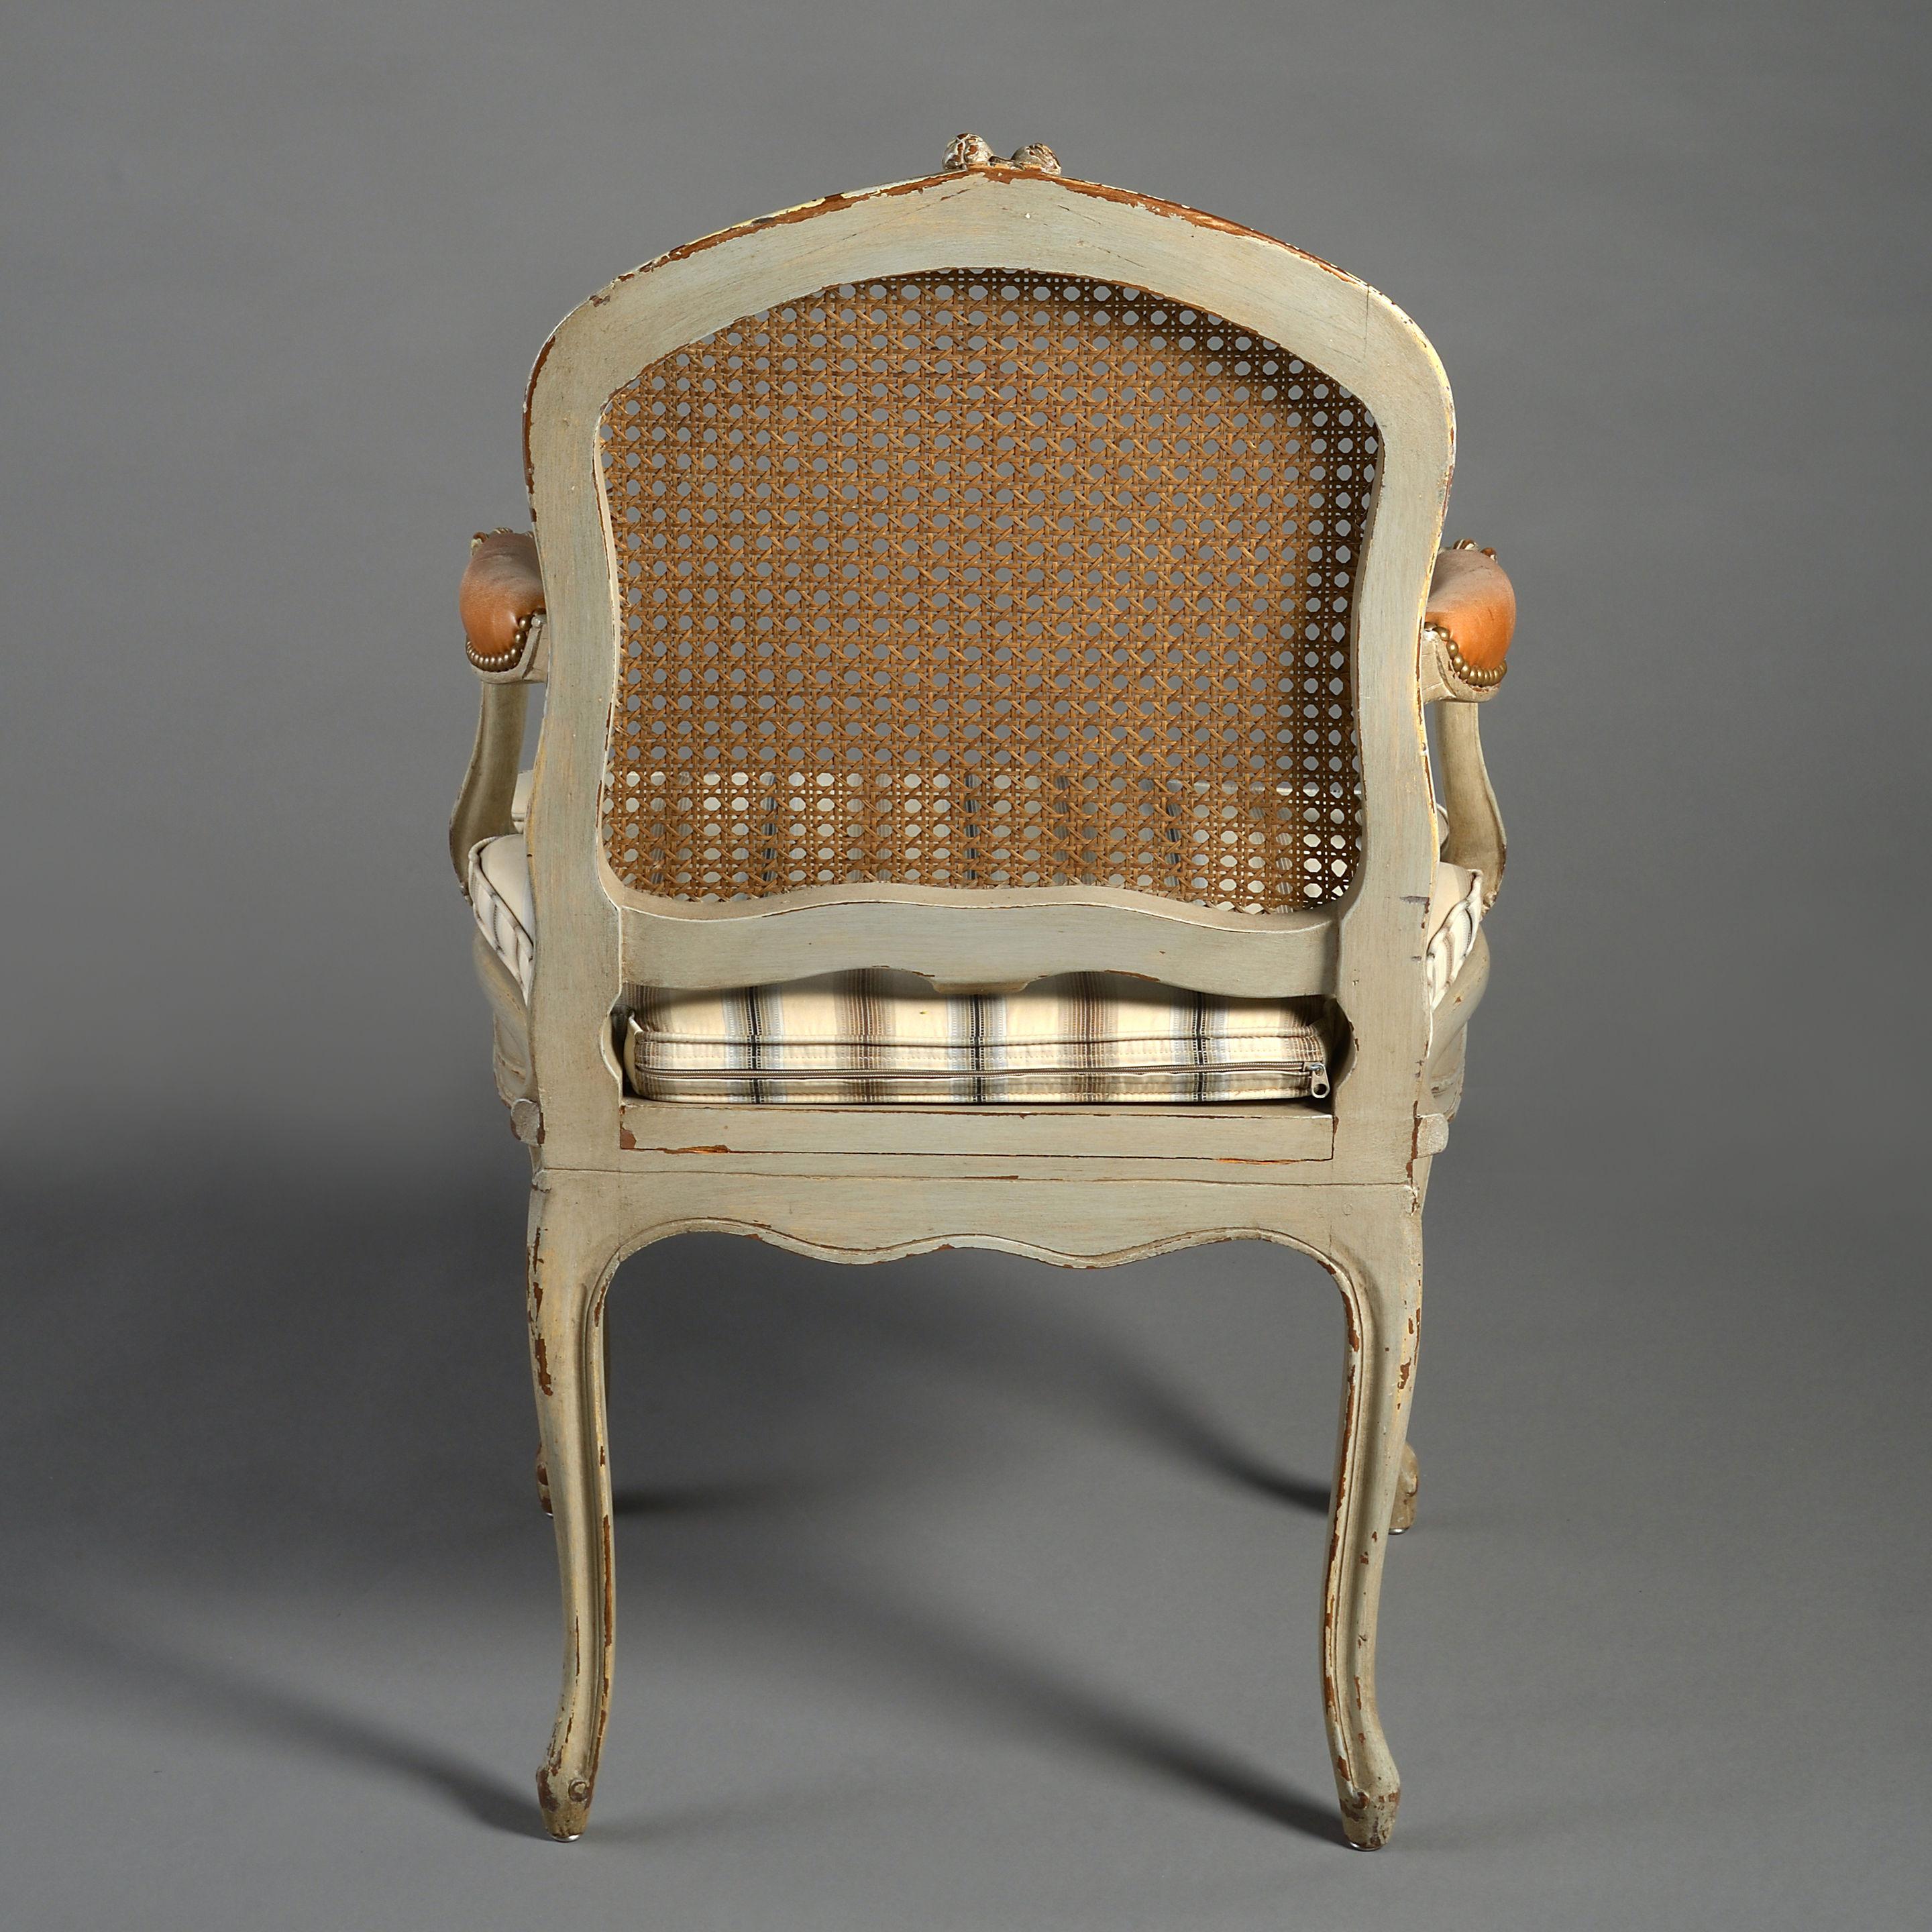 Late 19th Century Pair of 19th Century Rococo Revival Armchairs in the Louis XV Taste